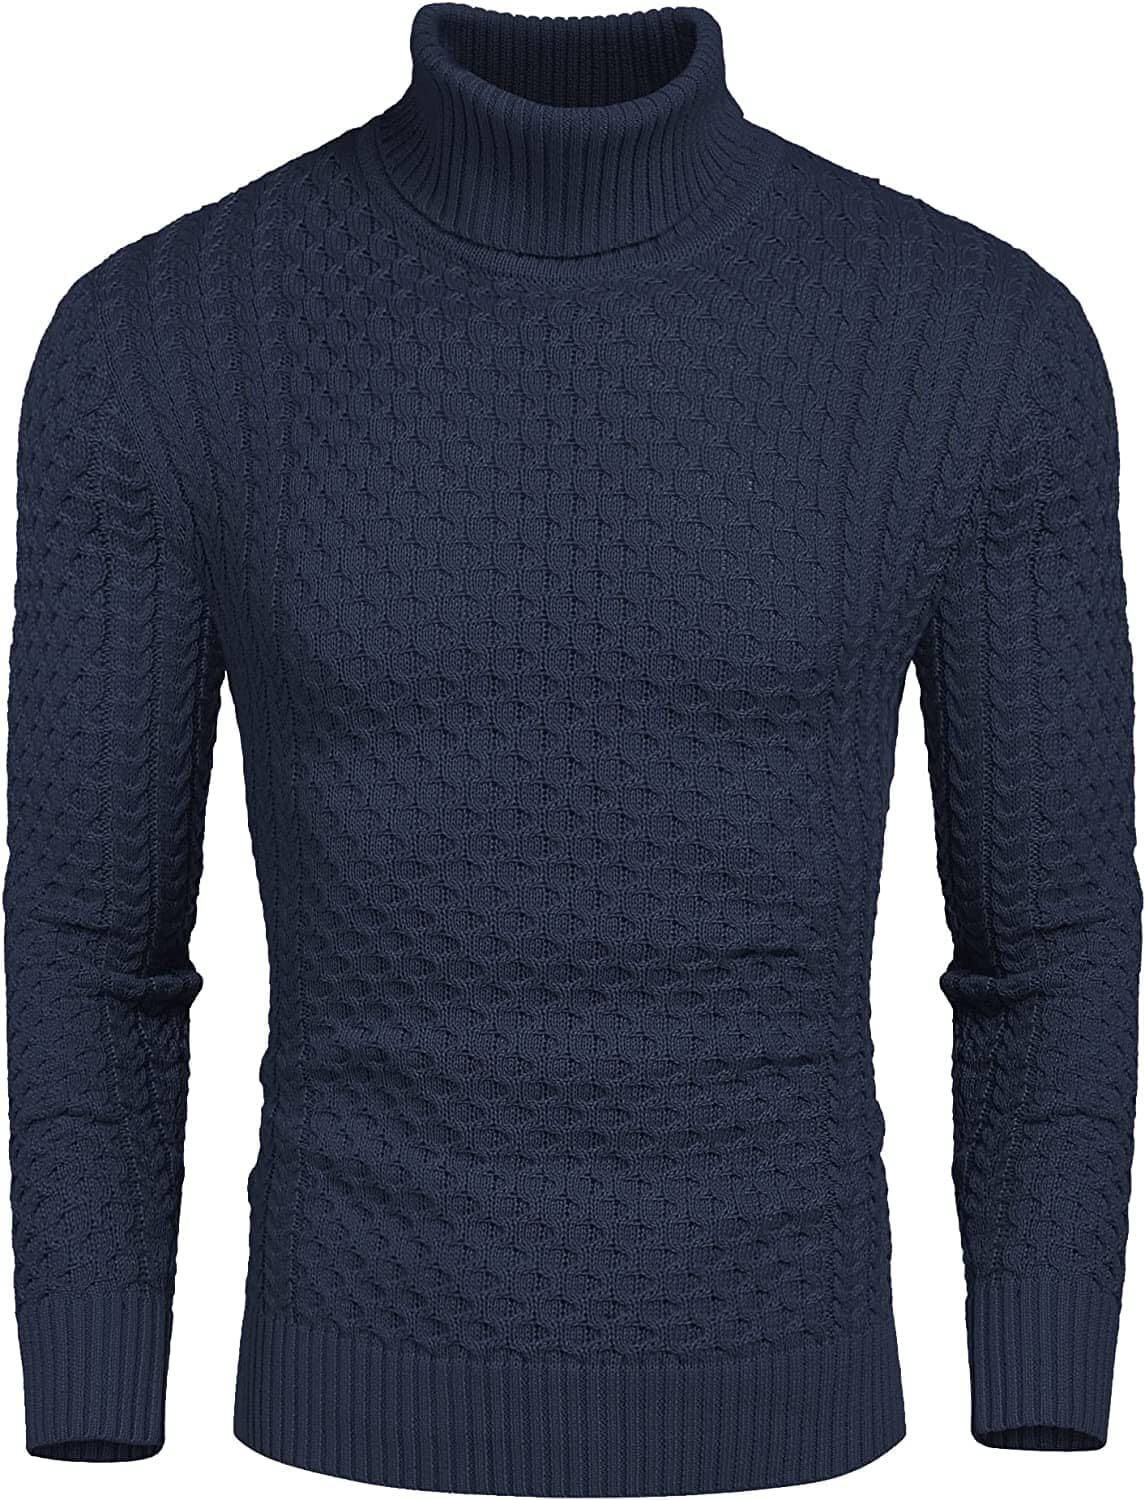 Slim Fit Turtleneck Knitted Twisted Pullover Sweaters (US Only) Sweaters Coofandy's Dark Blue S 